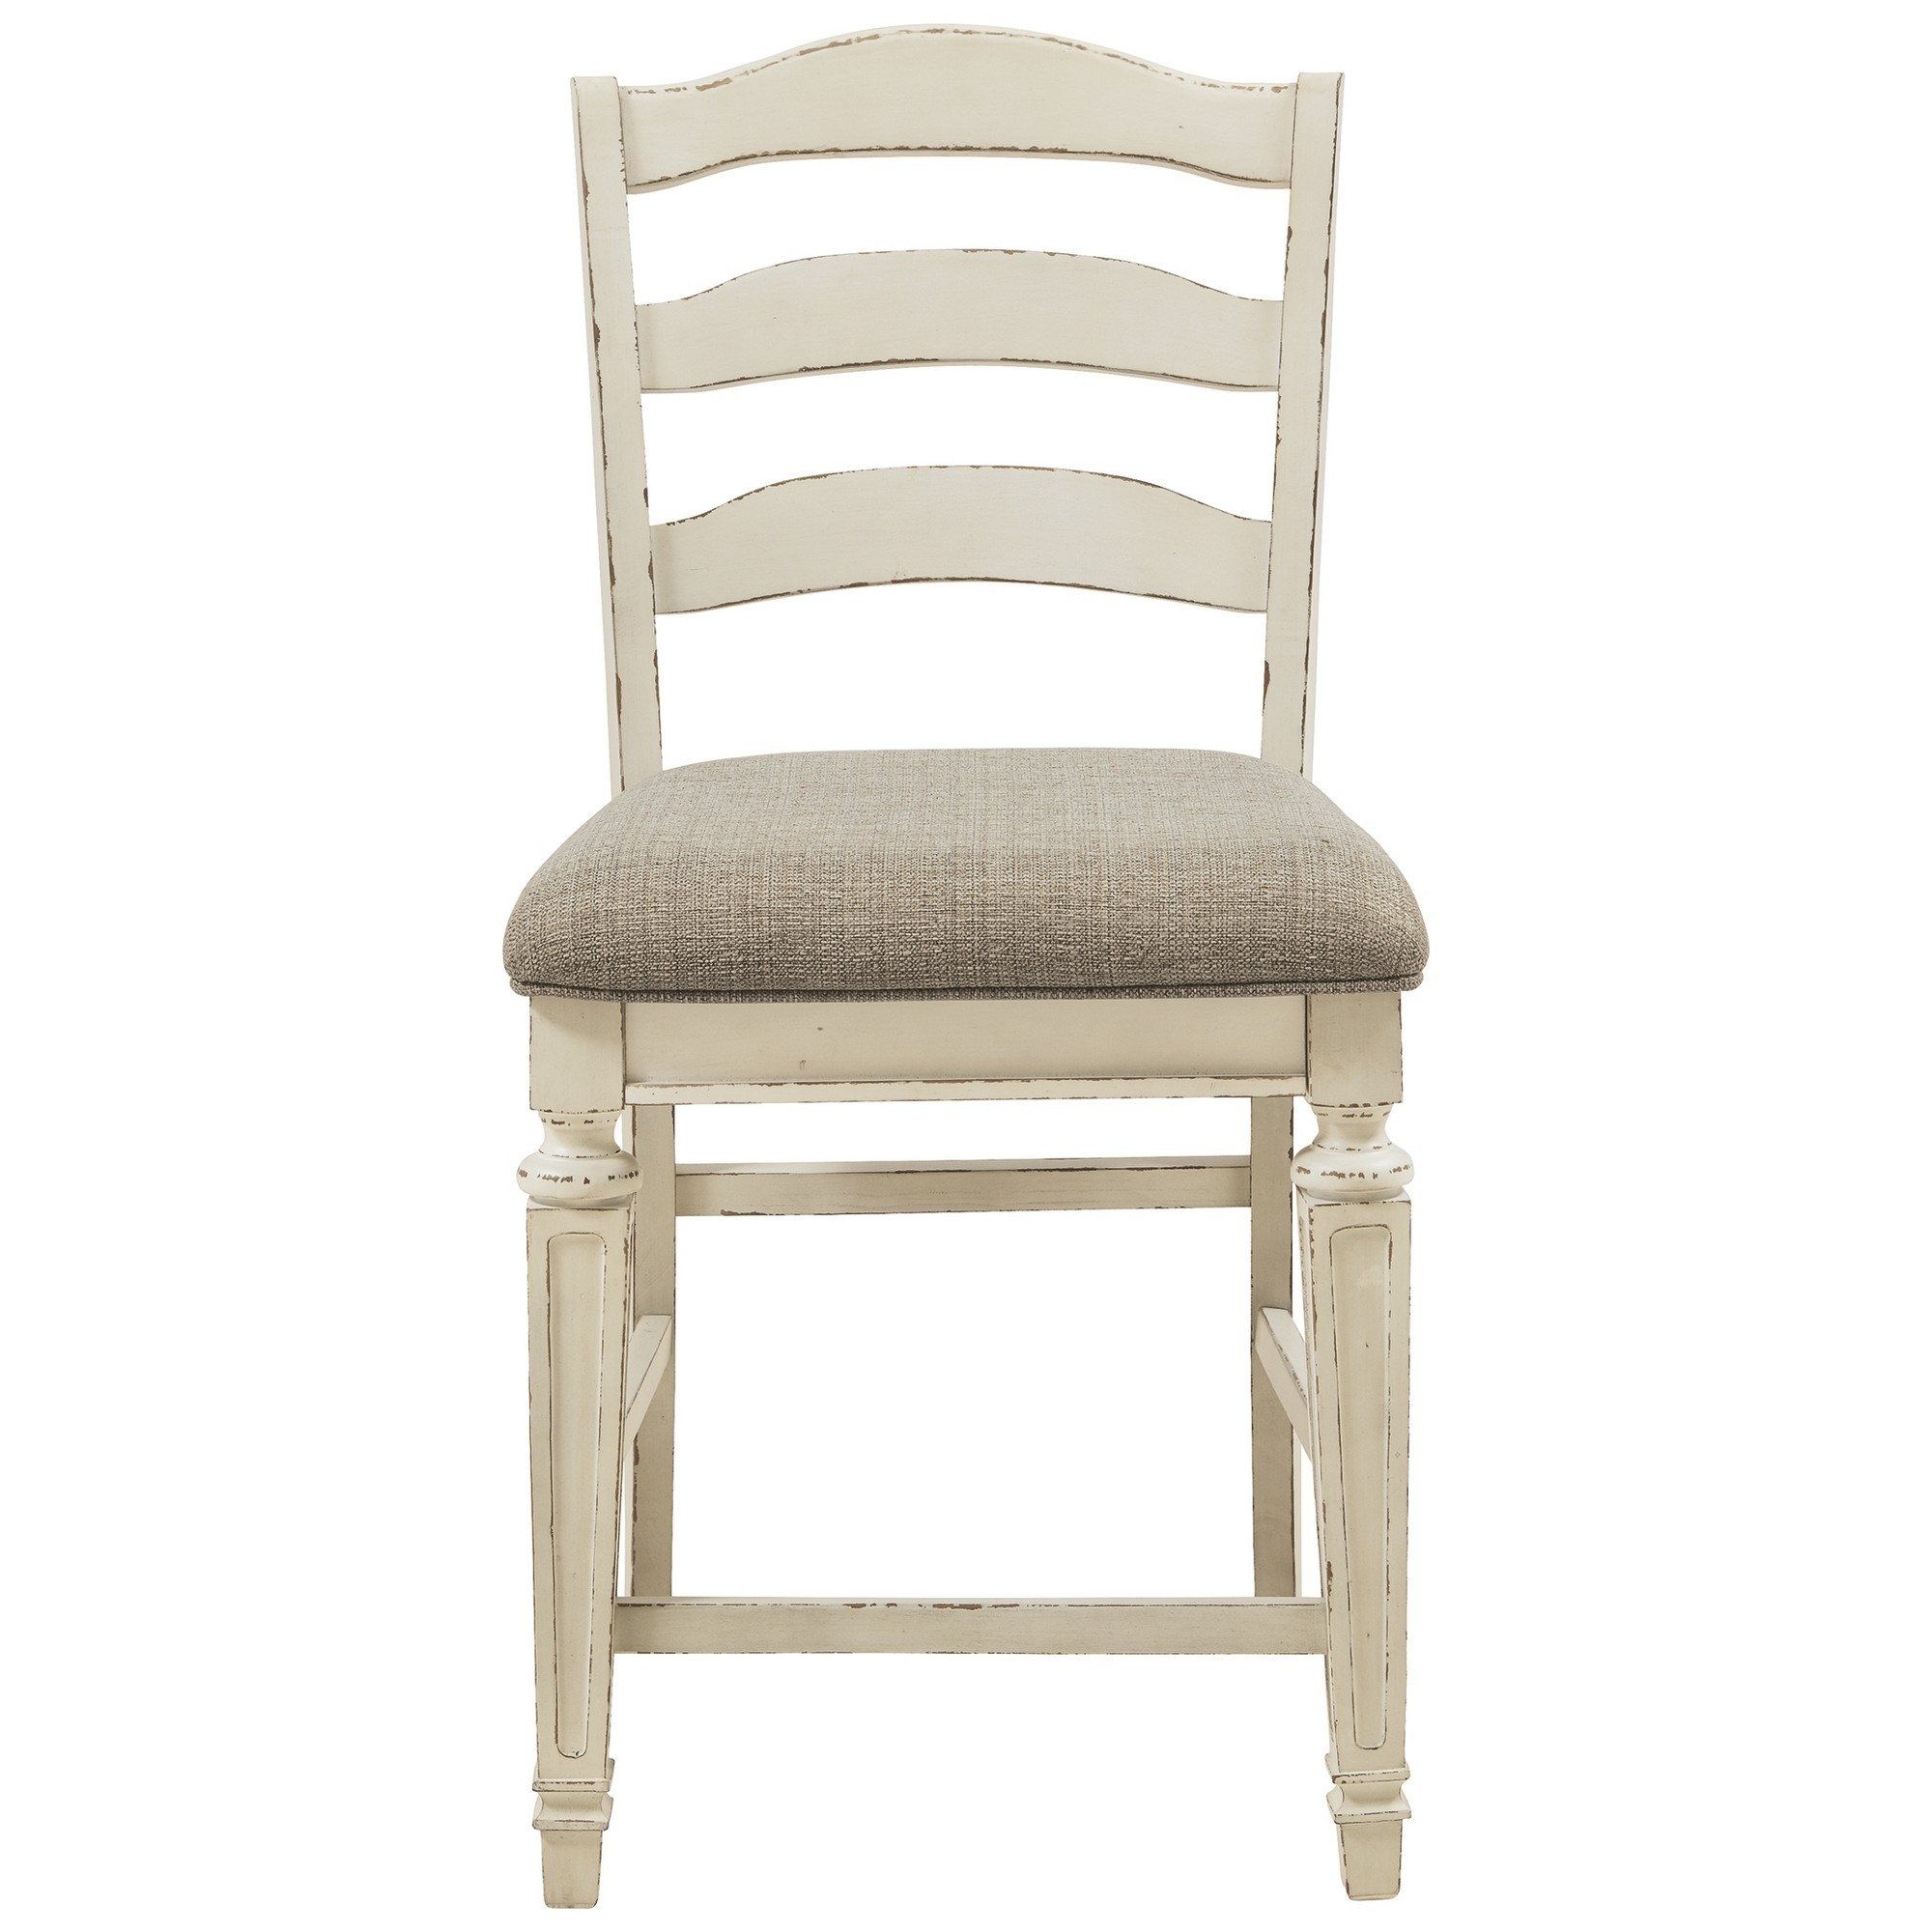 Fabric Upholstered Barstool With Ladder Back, Set Of 2, White And Brown- Saltoro Sherpi